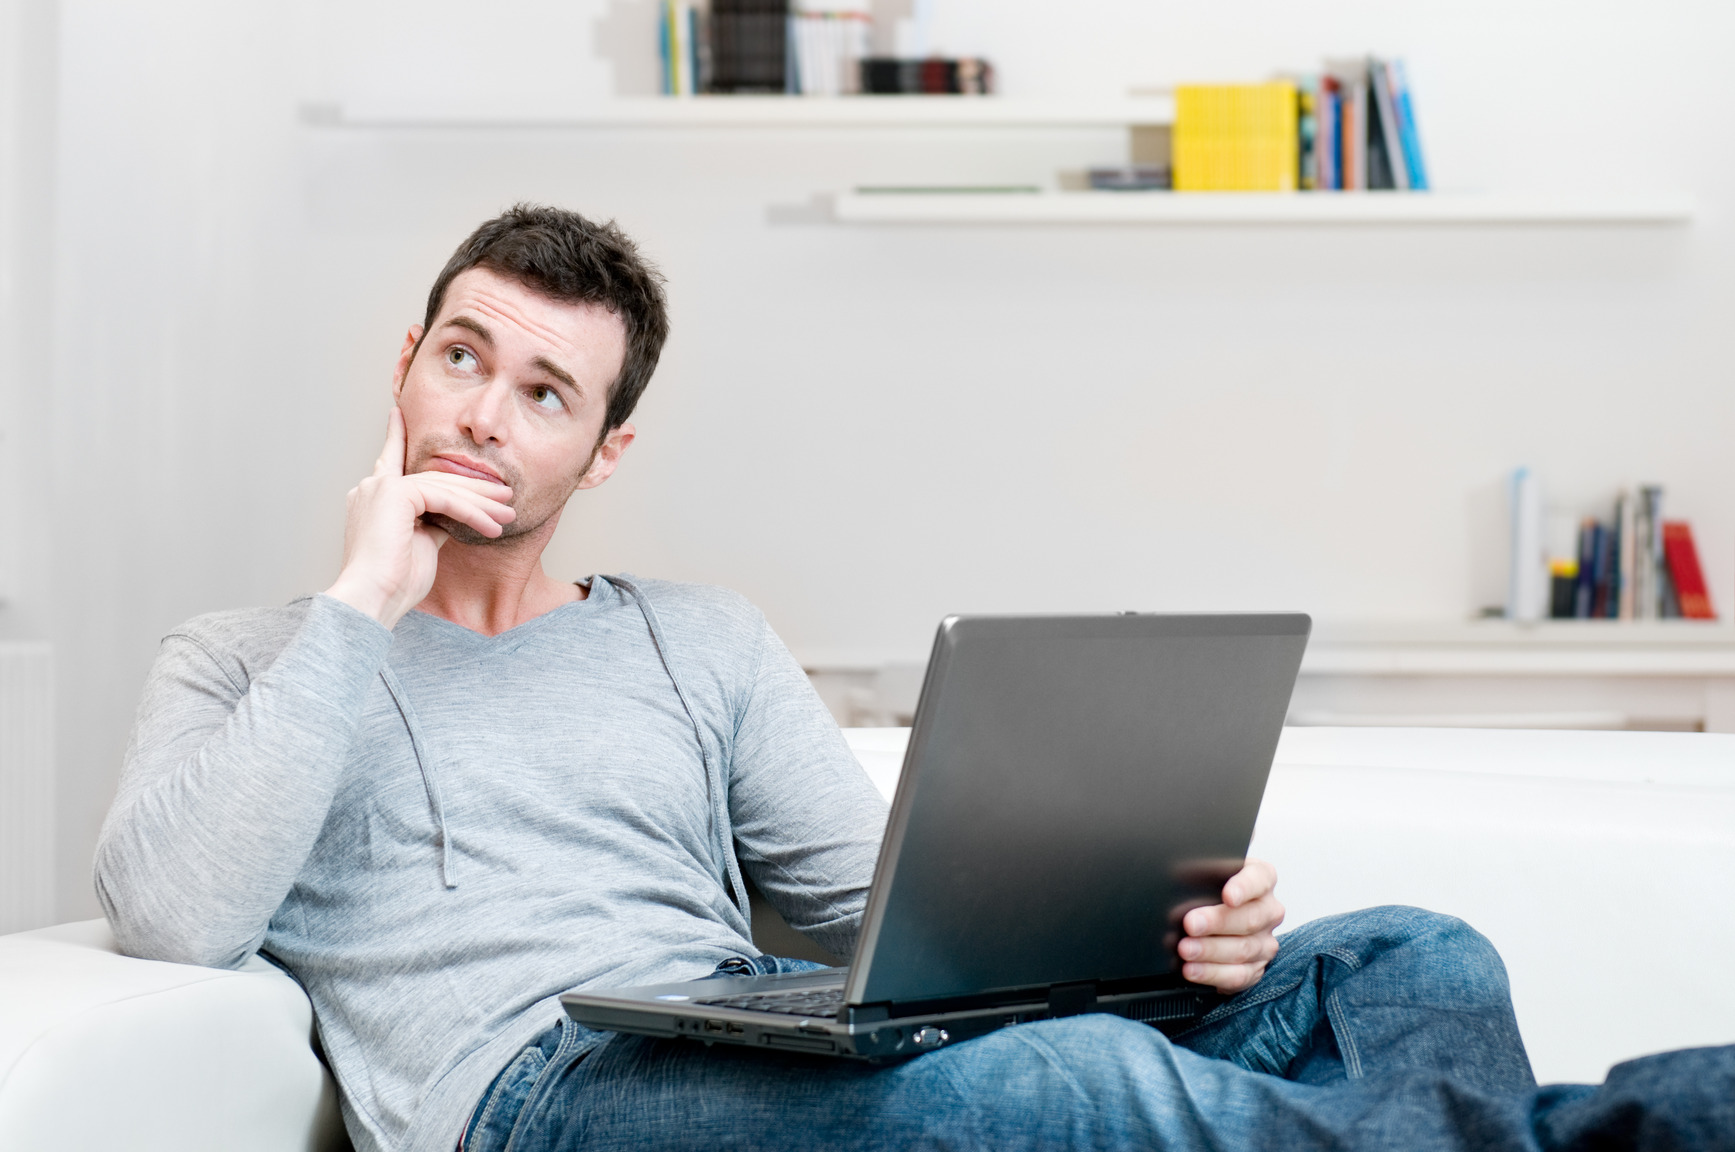 photodune-7145988-absorbed-and-confused-man-on-laptop-m